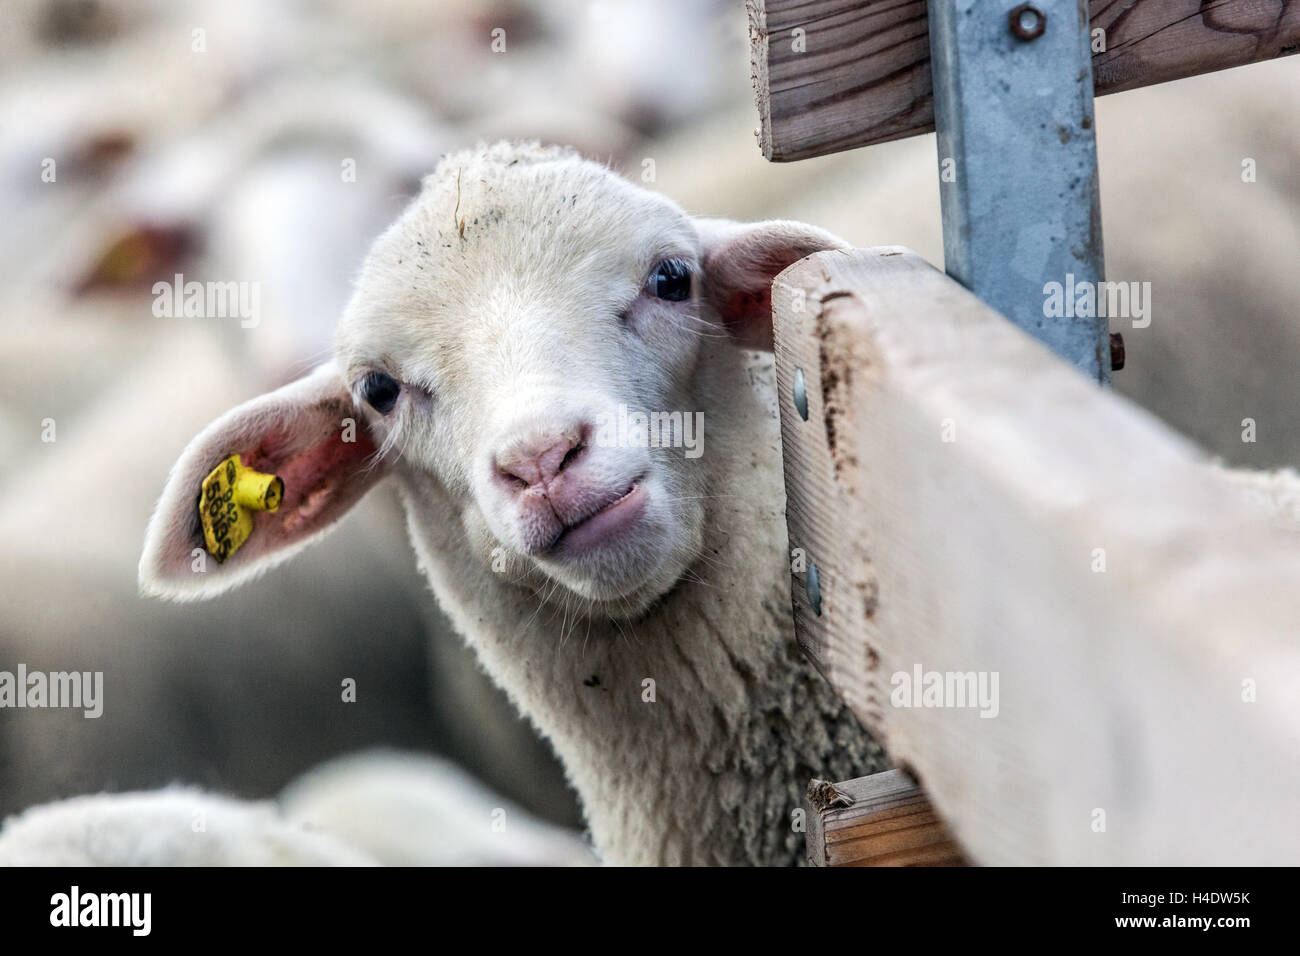 Sheep head in pen Wooden fence Sheep farm livestock Sheep Looking Through Fence Marked Ear Young Sheep Czech Republic Europe Stock Photo